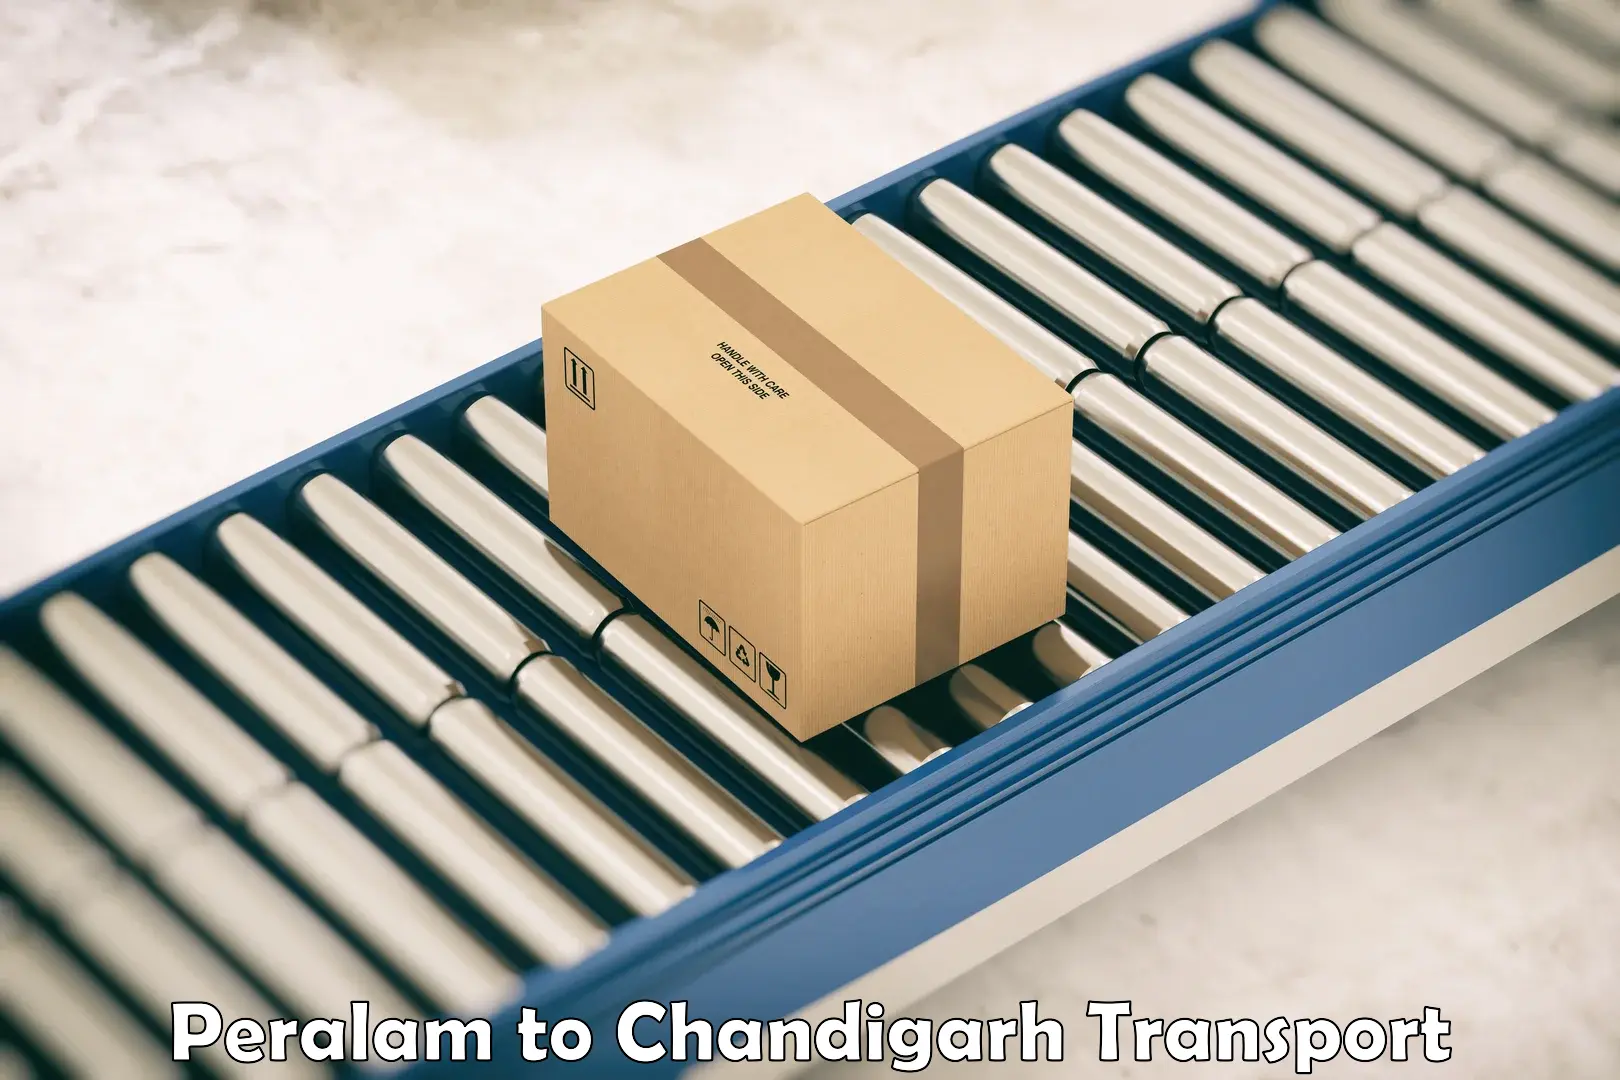 Container transport service Peralam to Chandigarh